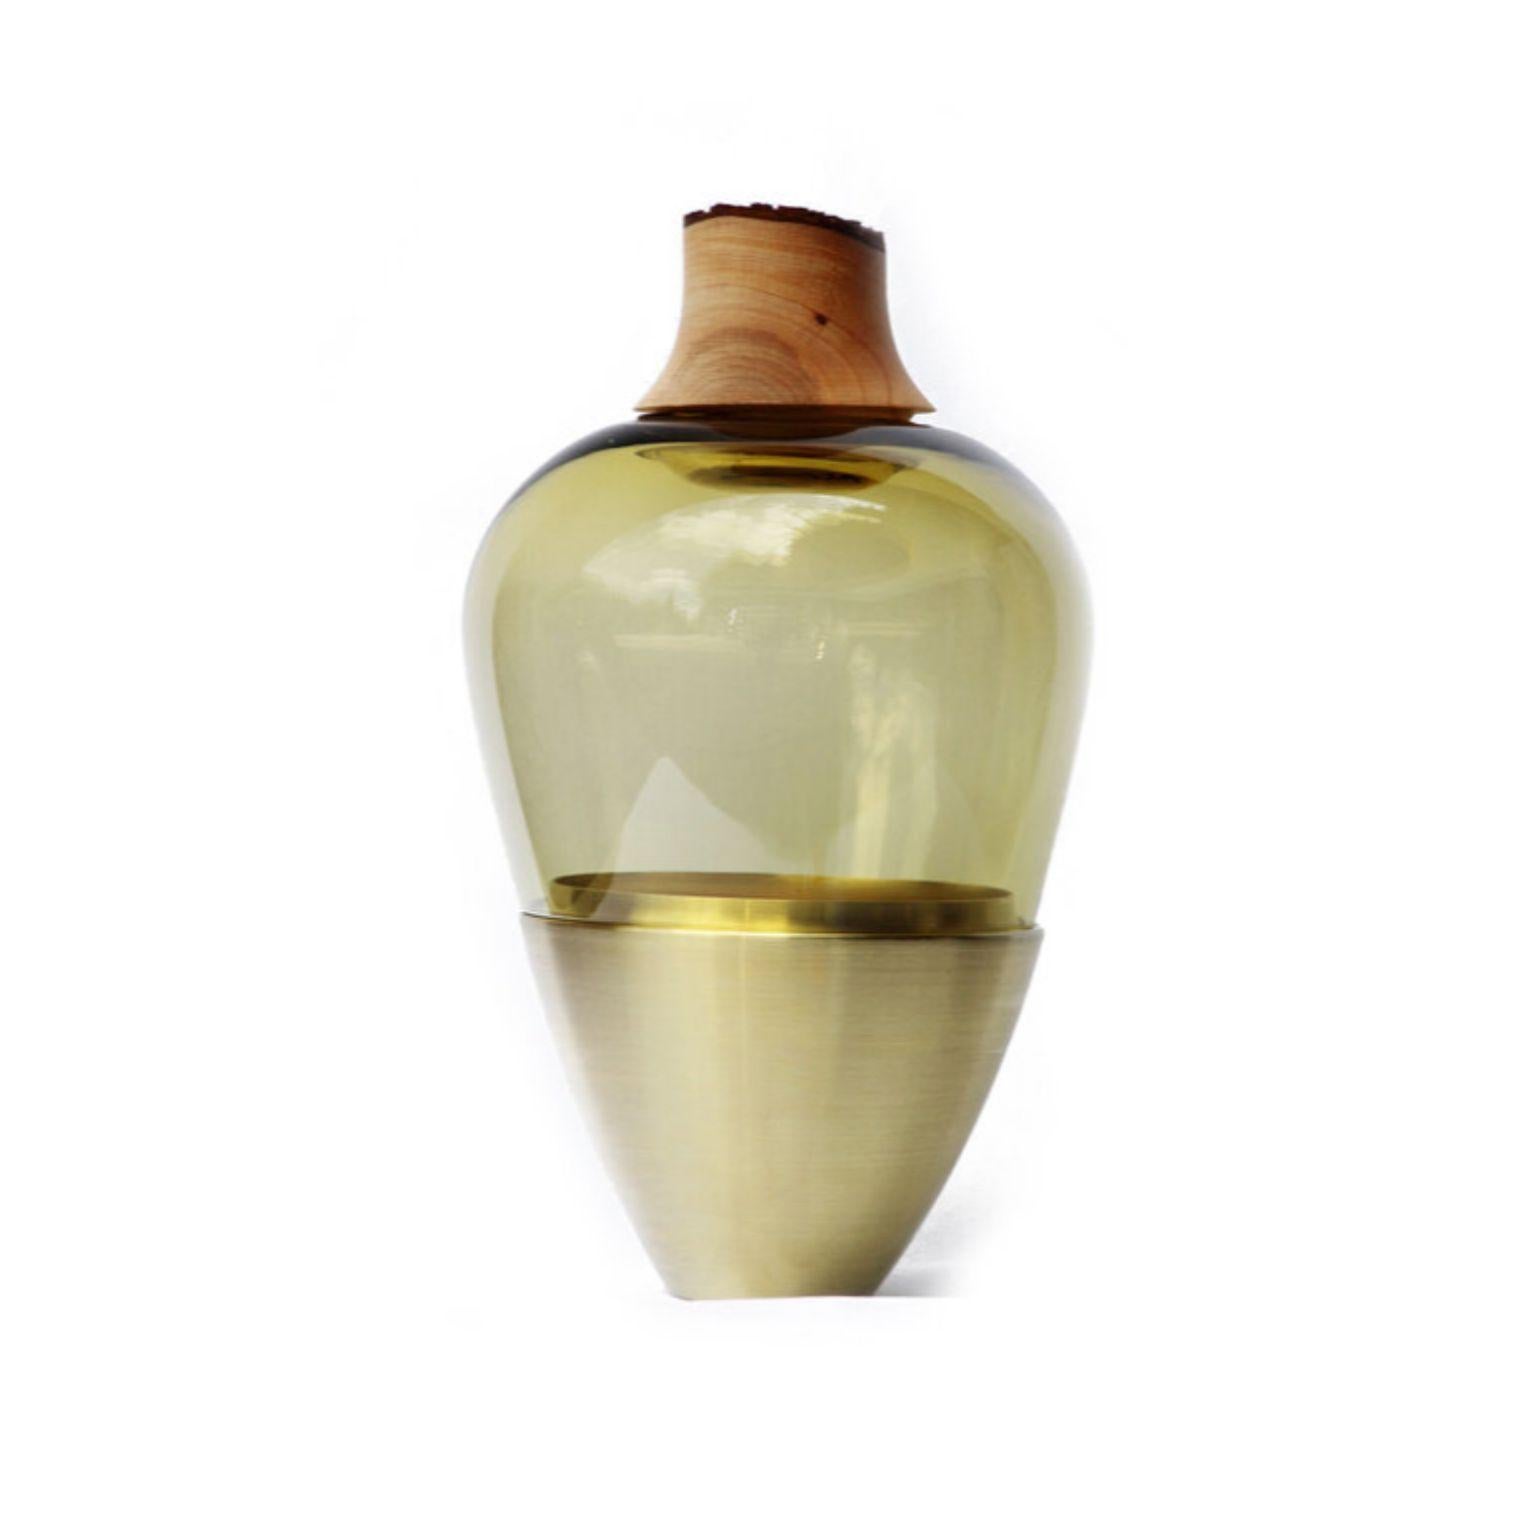 Olive and brass sculpted blown glass, Pia Wüstenberg
Dimensions: Height 20 x diameter 38cm
Materials: Hand blown glass, brass

Pia Wüstenberg, Utopia
Pia Wüstenberg is a creative with a passion for materials and craft. She graduated from the